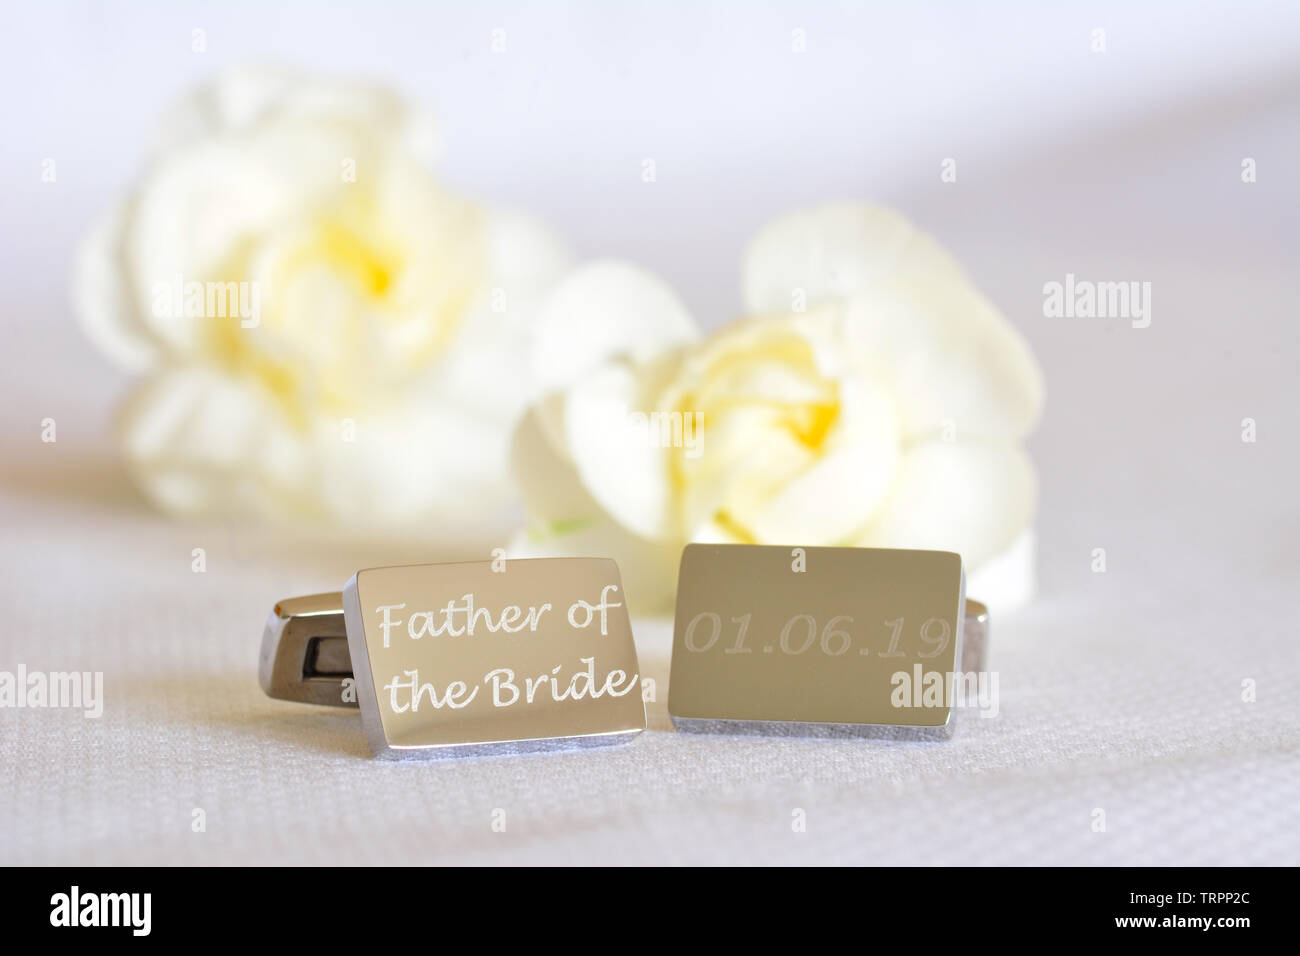 Father of the Bride cufflinks Stock Photo